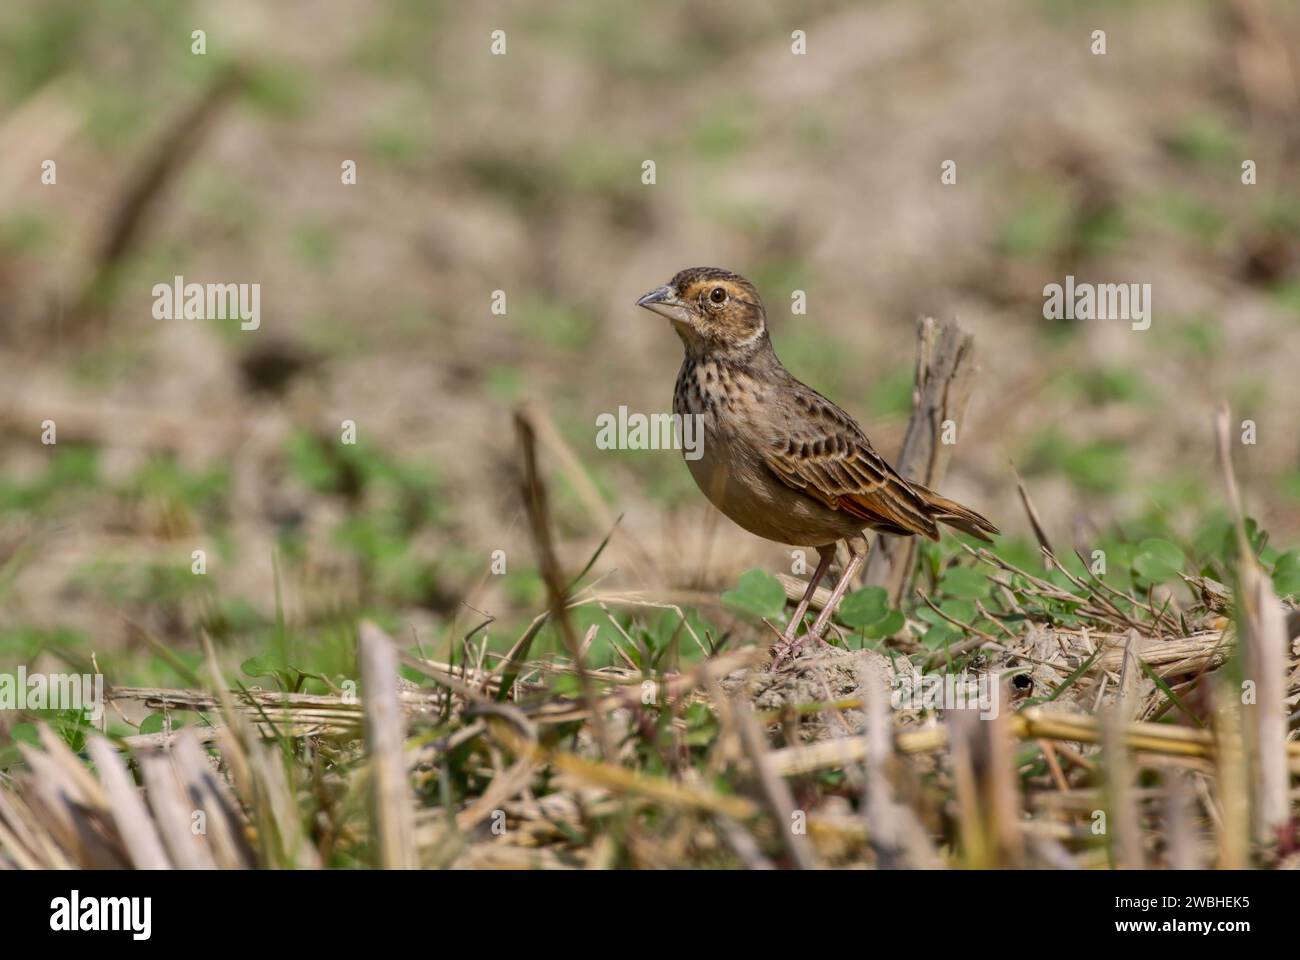 Bengal bush lark (Mirafra assamica) or Bengal lark is a species of lark in the family Alaudidae found in southern Asia. Stock Photo